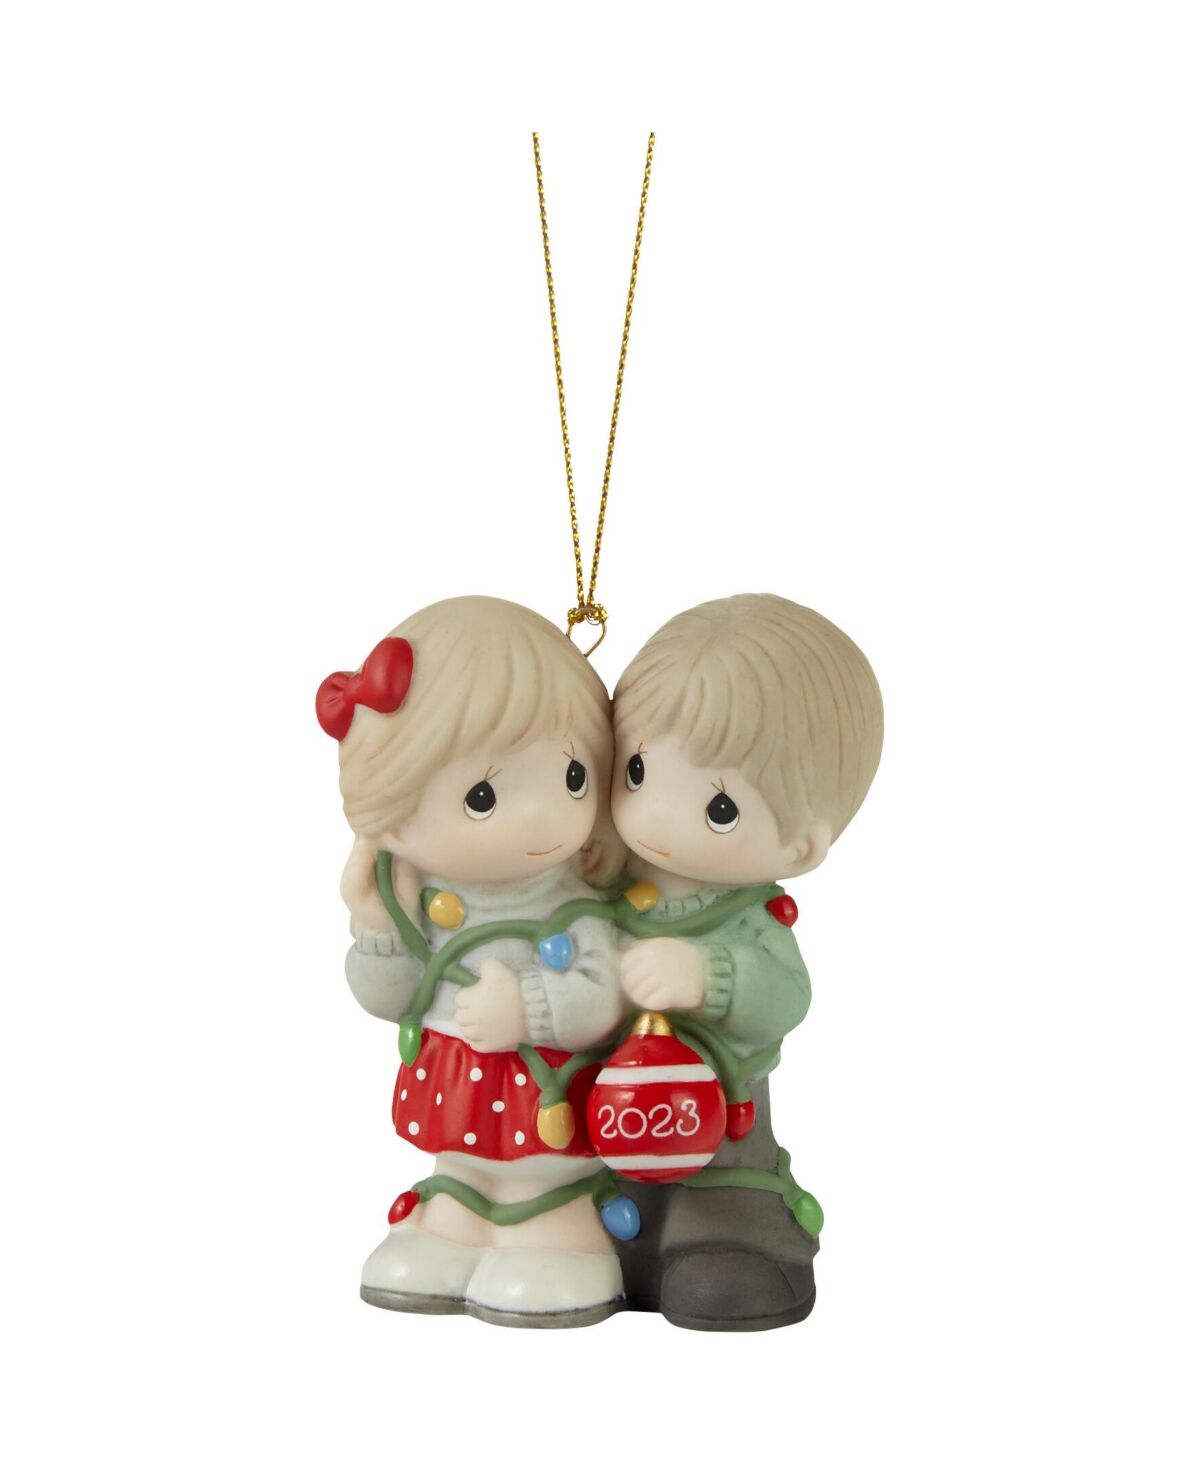 Precious Moments Our First Christmas Together 2023 Dated Couple Bisque Porcelain Ornament - Multicolored